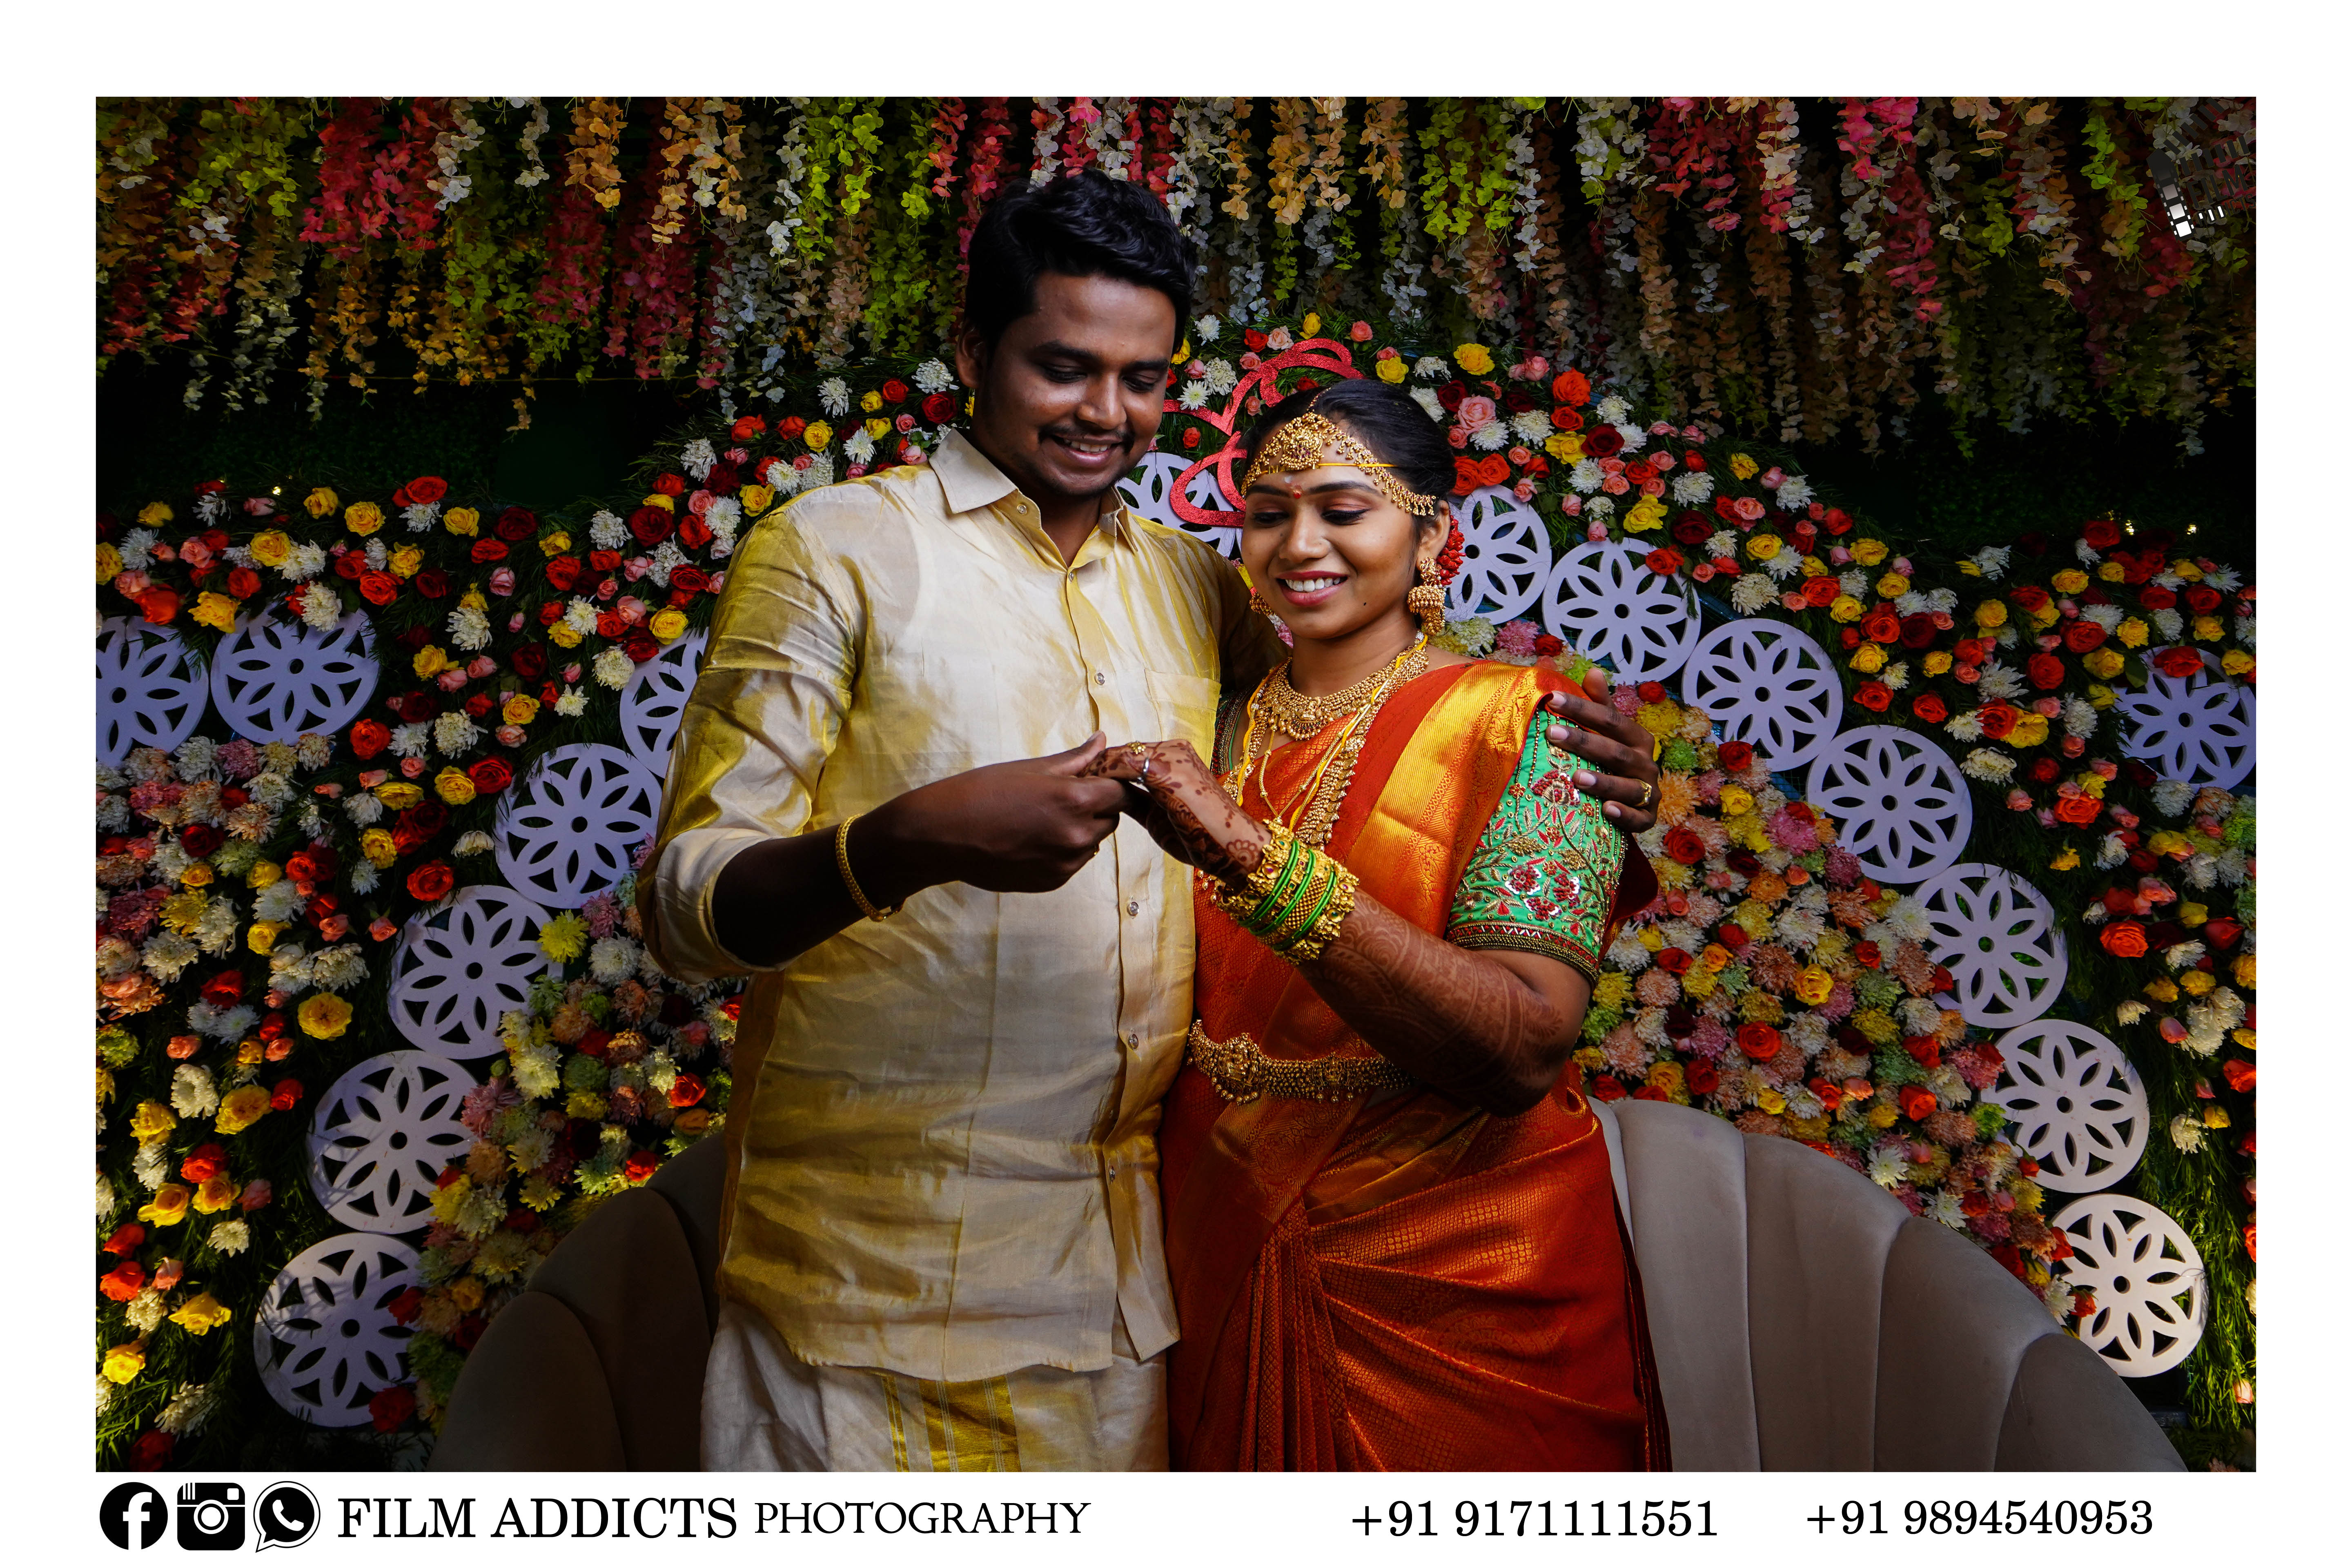 Best Wedding Planners in Theni-Filmaddicts Photography,Theni Wedding Planners, Best Wedding Planners in Theni,Wedding Planners in Theni, Best Wedding Photographers in Theni-FilmAddicts Photography, Best candid photographers in Theni, Best Wedding Candid photographers in Theni, Wedding Candid Moments, FilmAddicts, Photography, FilmAddictsPhotography, best wedding in Theni, Best Candid shoot in Theni, best moment, Best wedding moments, Best wedding photography in Theni, Best wedding videography in Theni, Best couple shoot, Best candid, Best wedding shoot, Best wedding candid, best marraige photographers in Theni, best marraige photography in Theni, best candid photography, best Theni photography, Theni, Theni photography, Theni couples, candid shoot, candid, tamilnadu wedding photography, best photographers in Theni, tamilnadu